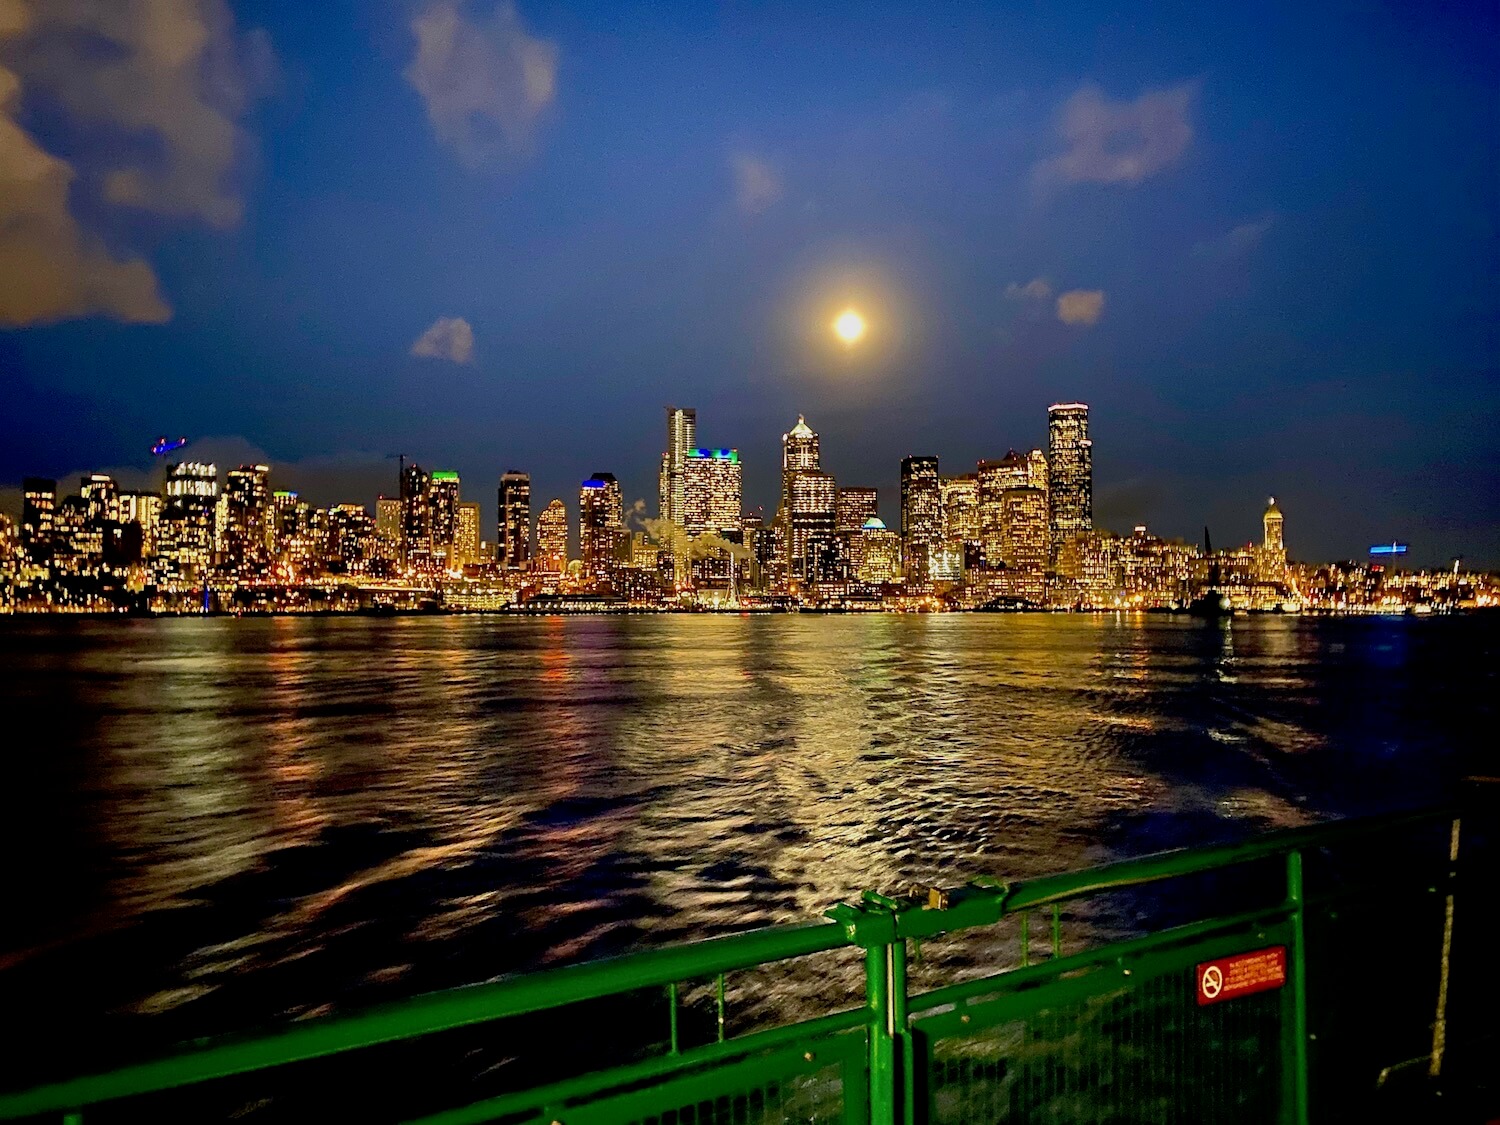 A view from a WA State ferry toward the lights of Seattle skyline. The moon shines above the buildings and blue sky with clouds in the dusk sky.